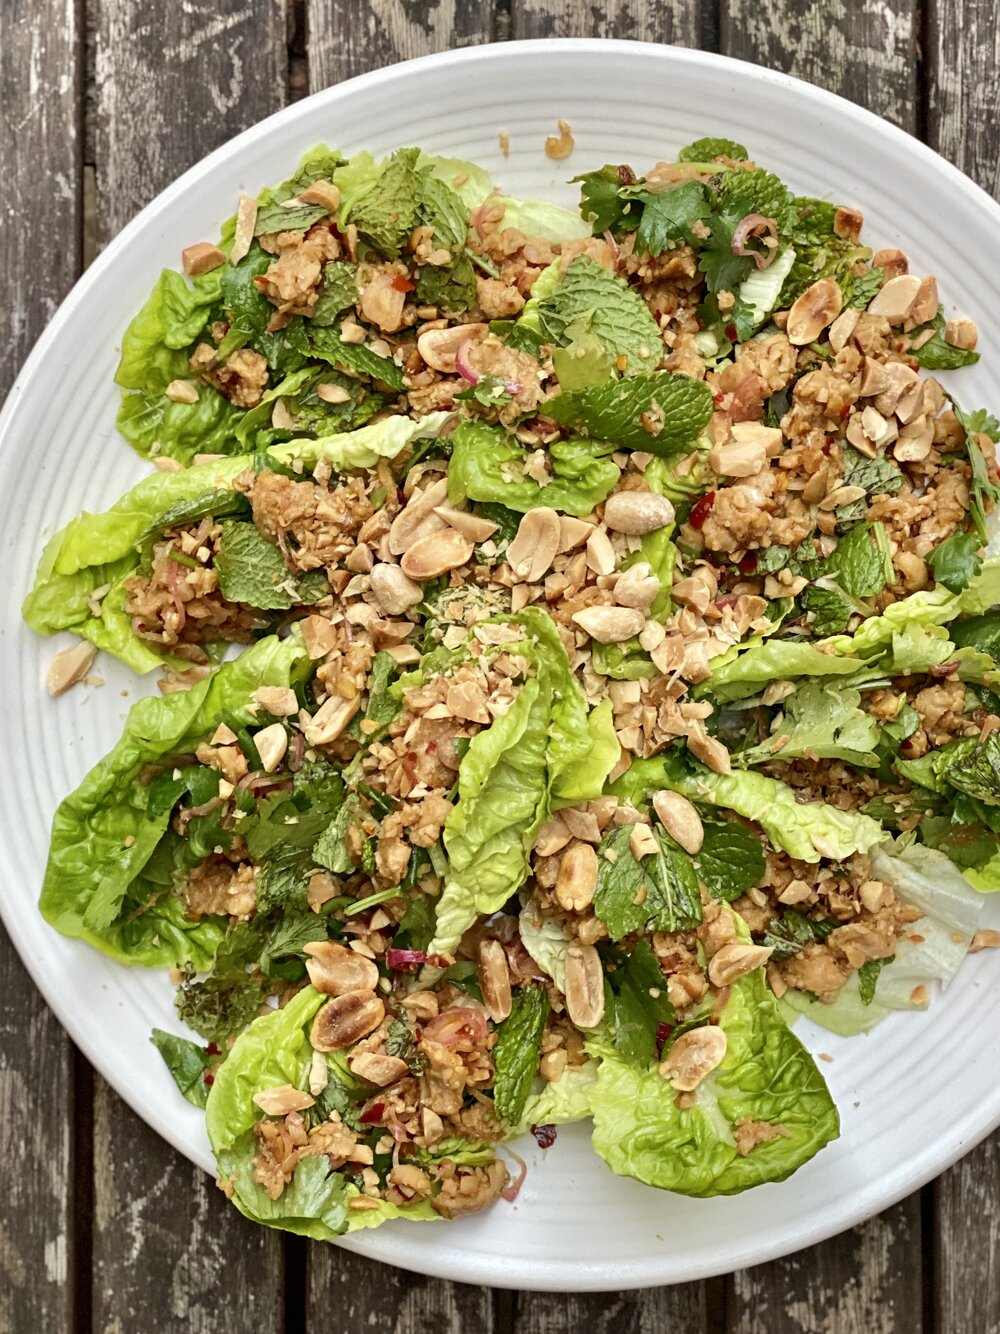 Zingy tempeh laab salad topped with lots of toasted peanuts